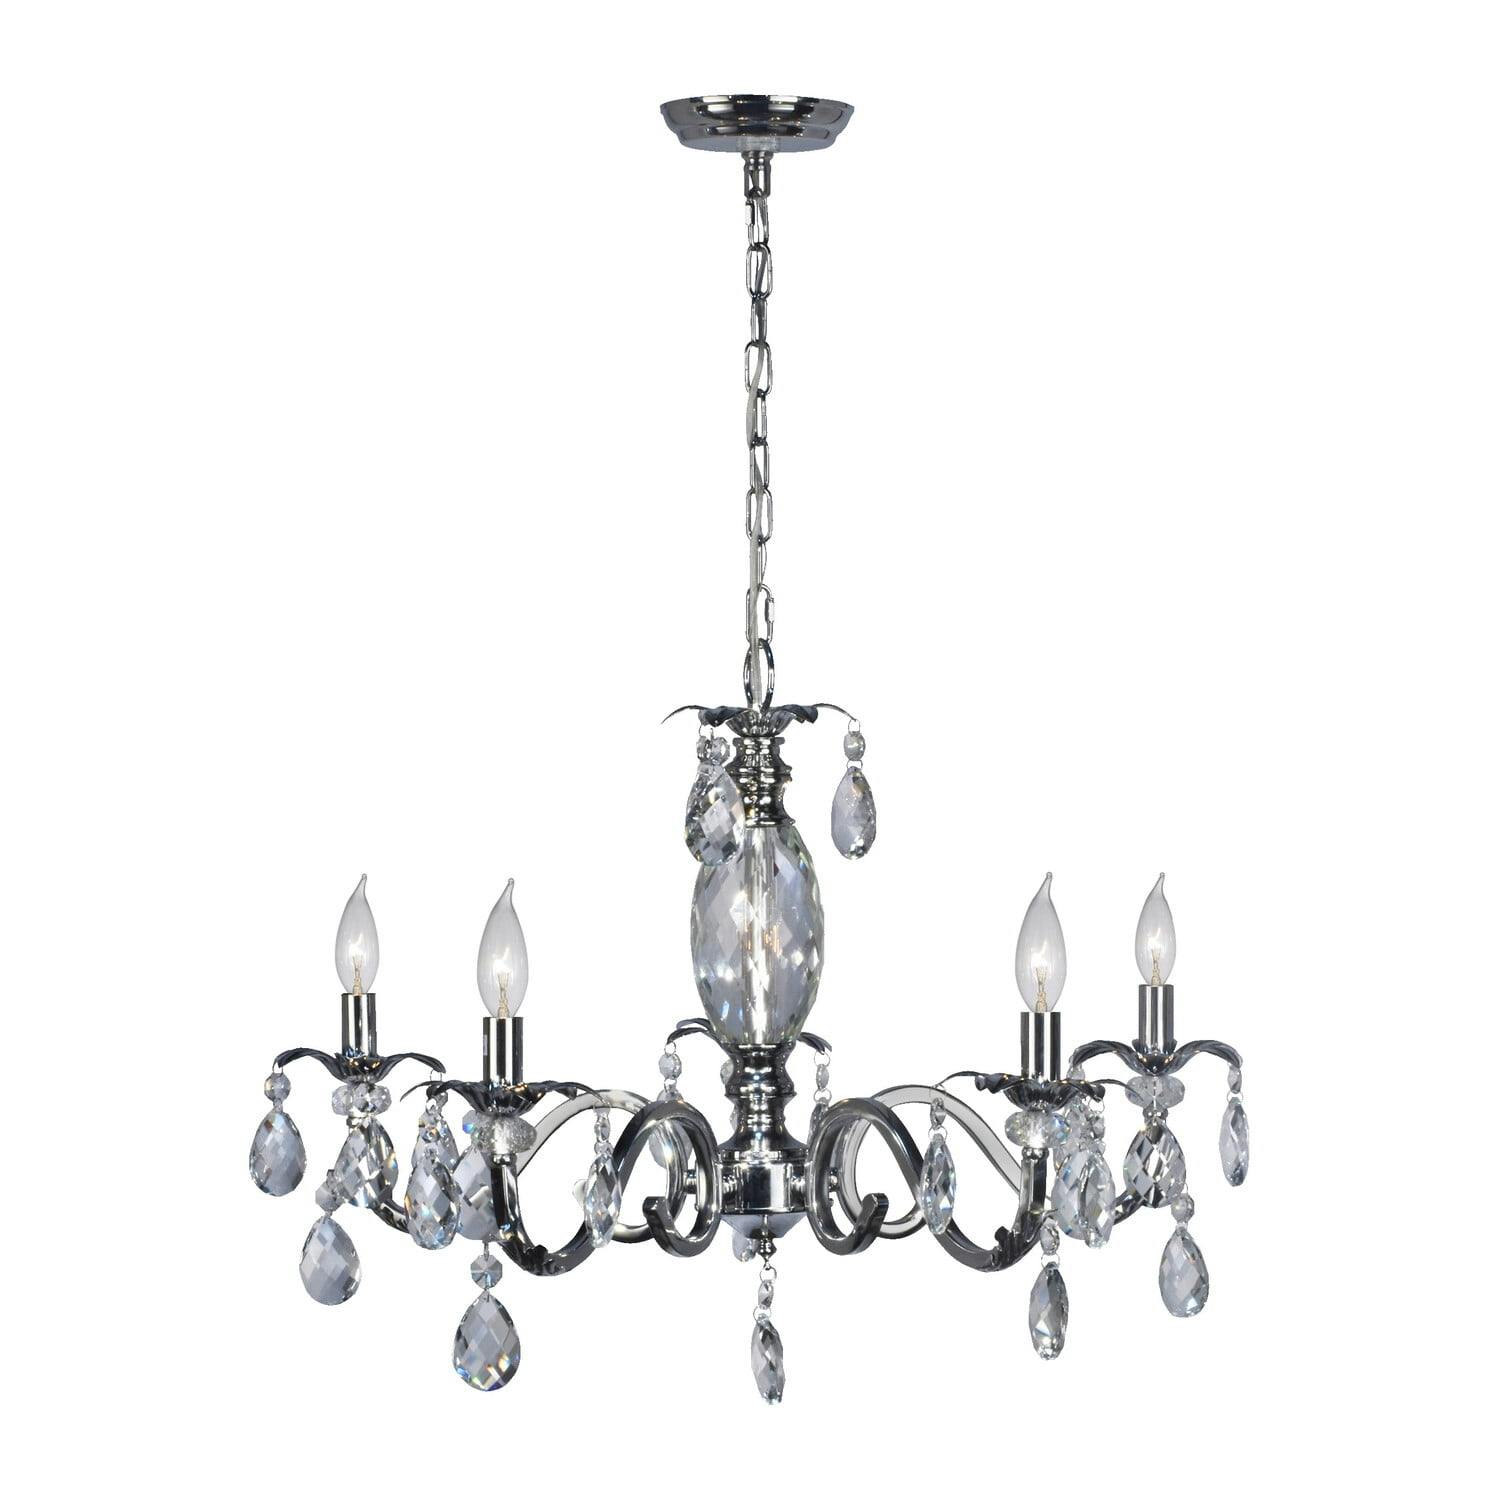 Clara Polished Chrome 5-Light Crystal Chandelier with Faceted Accents